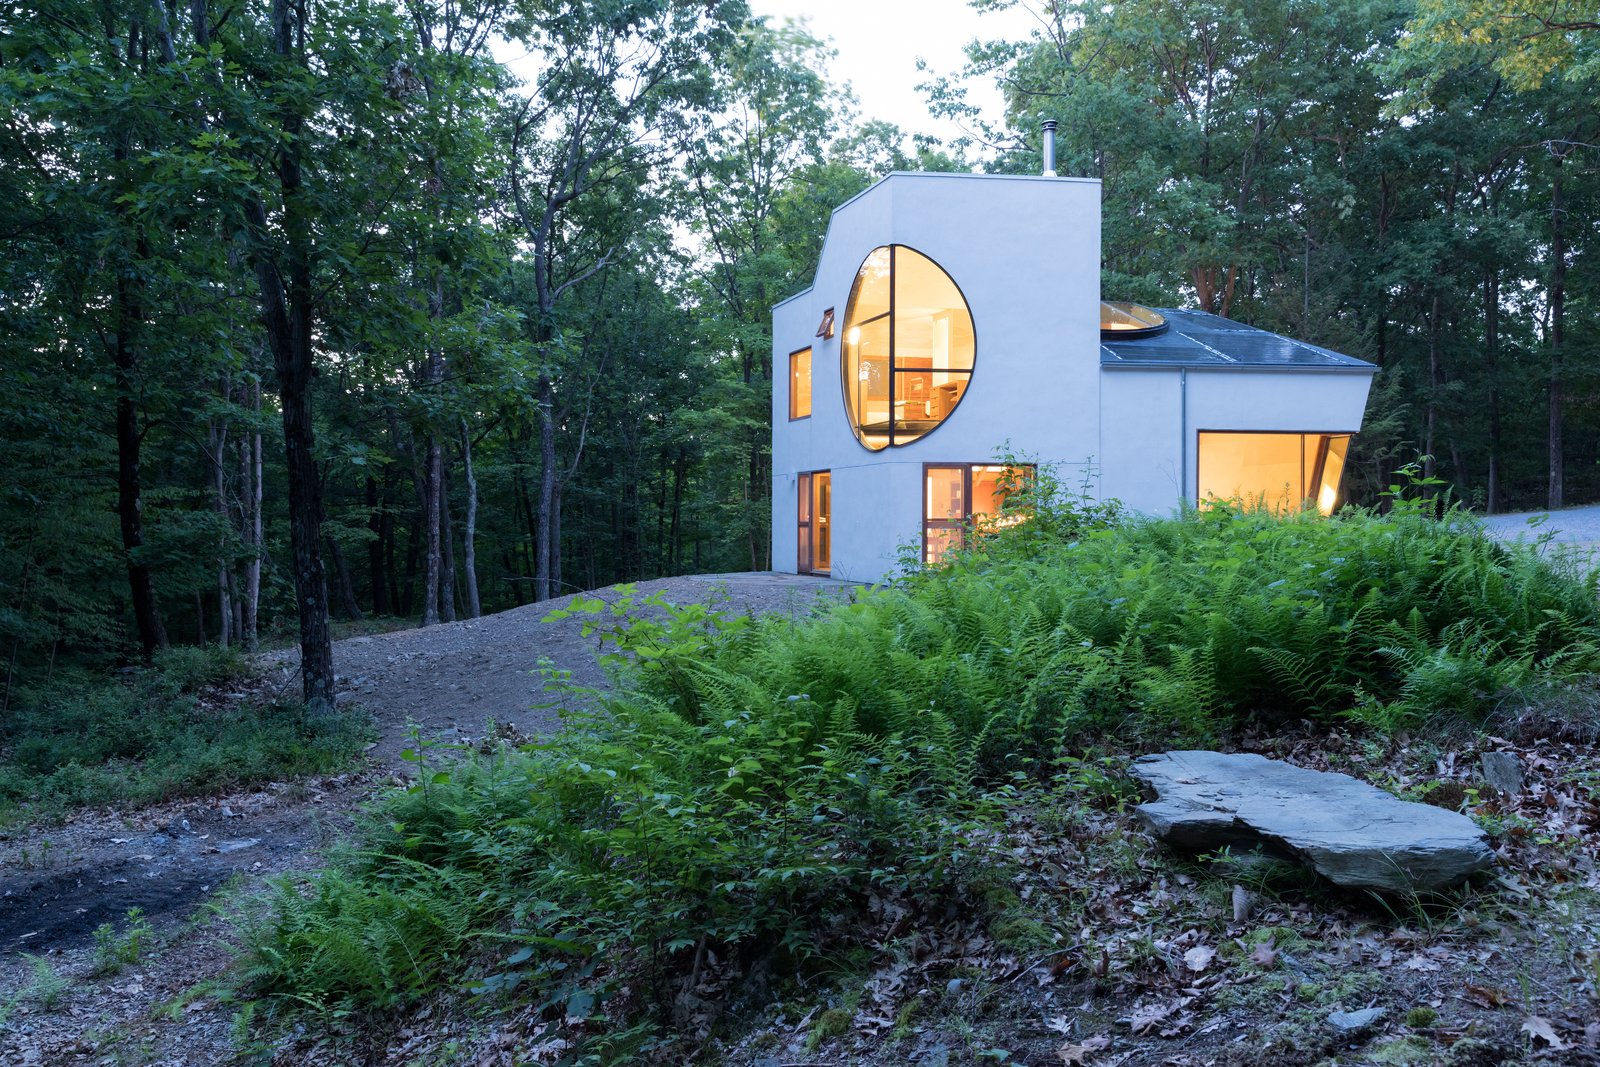 The Compact, Solar-Powered Ex of In House Sits Lightly Upon the Land